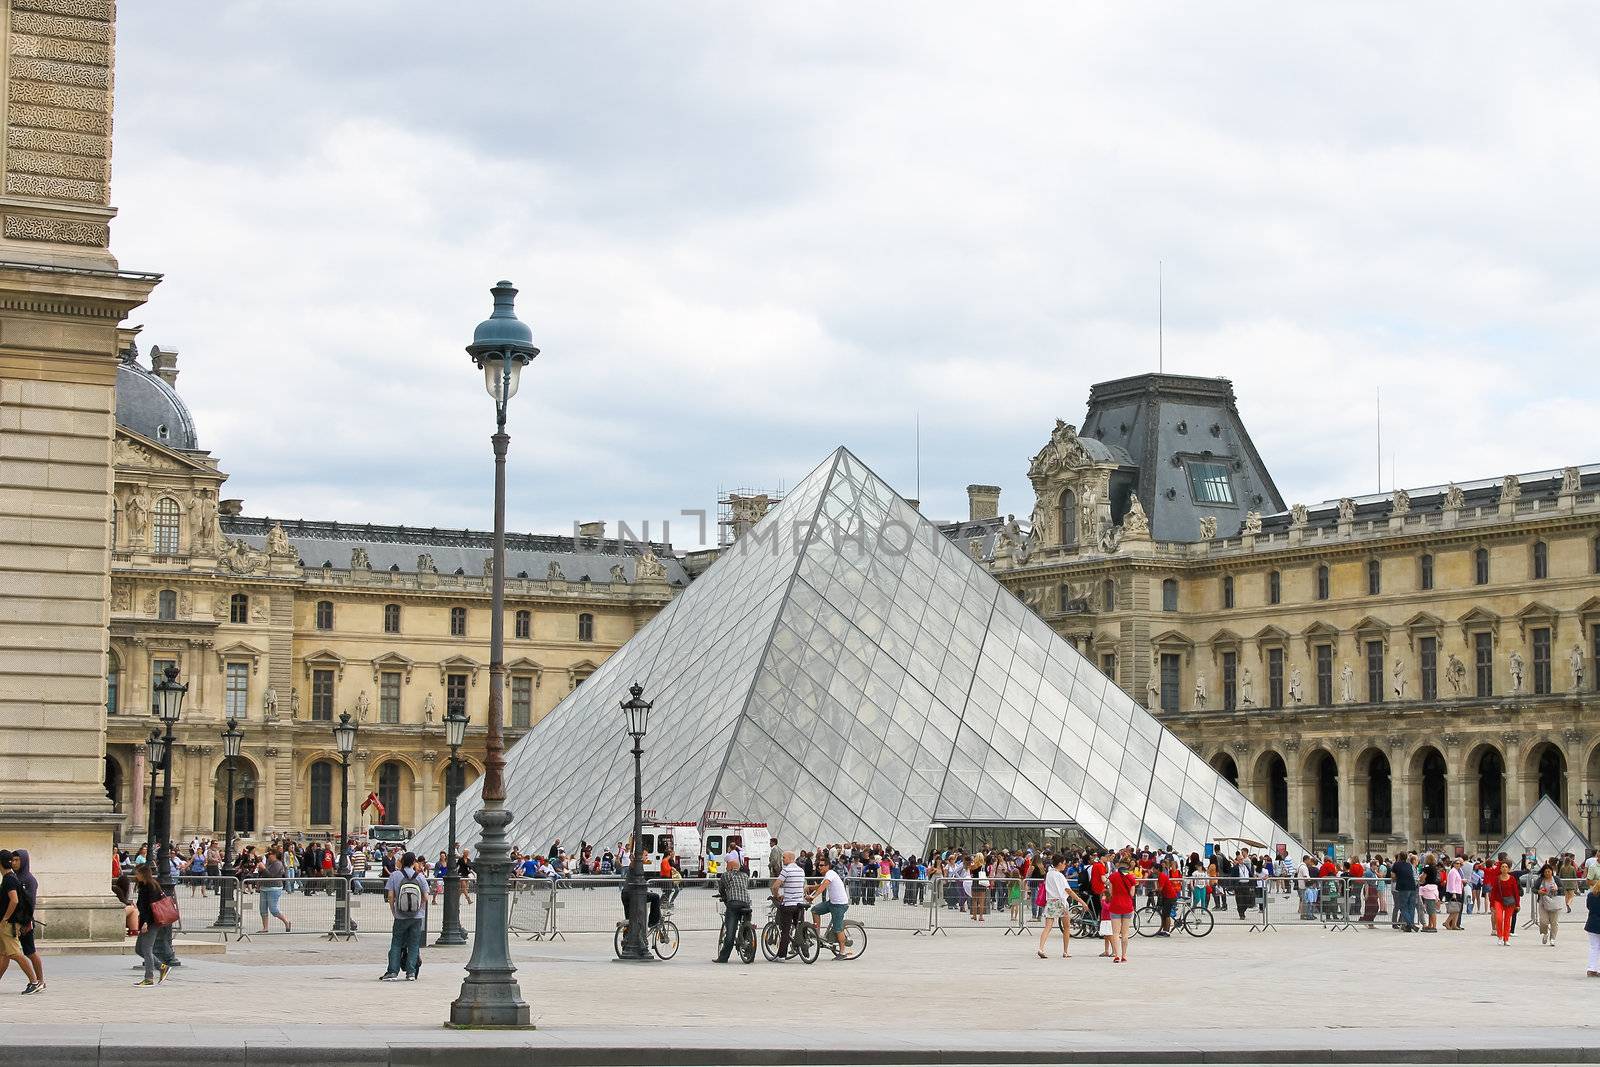 People in the square in front of the Louvre. Paris. France